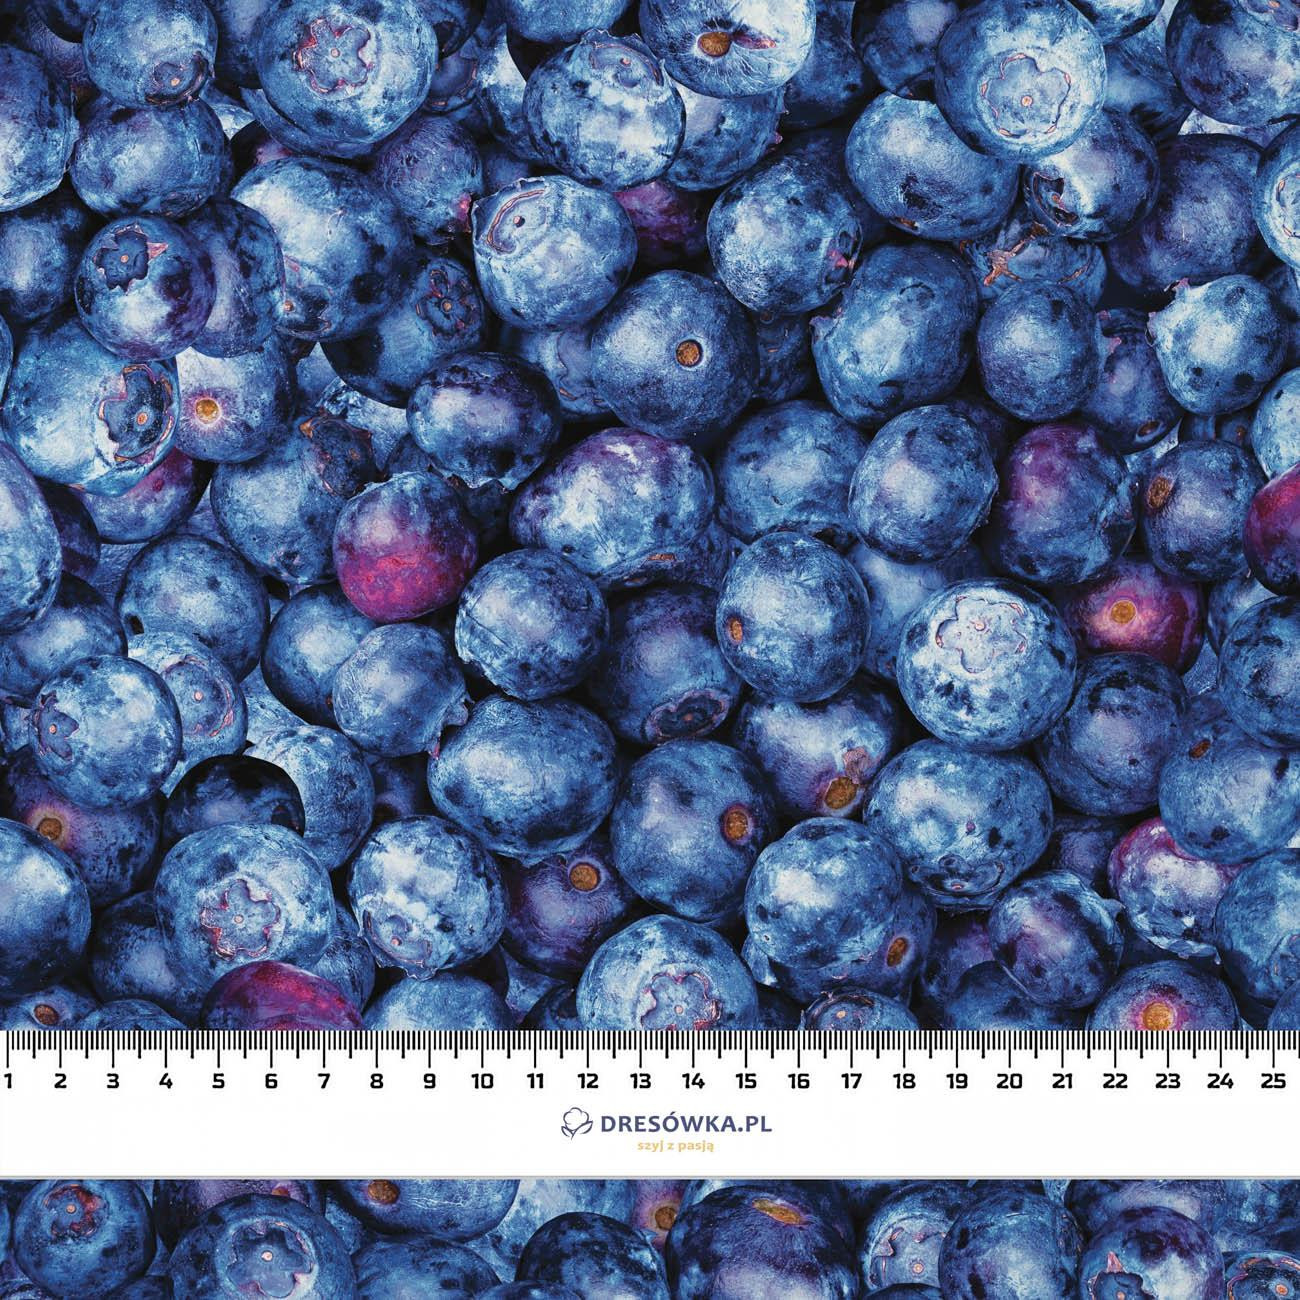 BLUEBERRIES - Cotton woven fabric